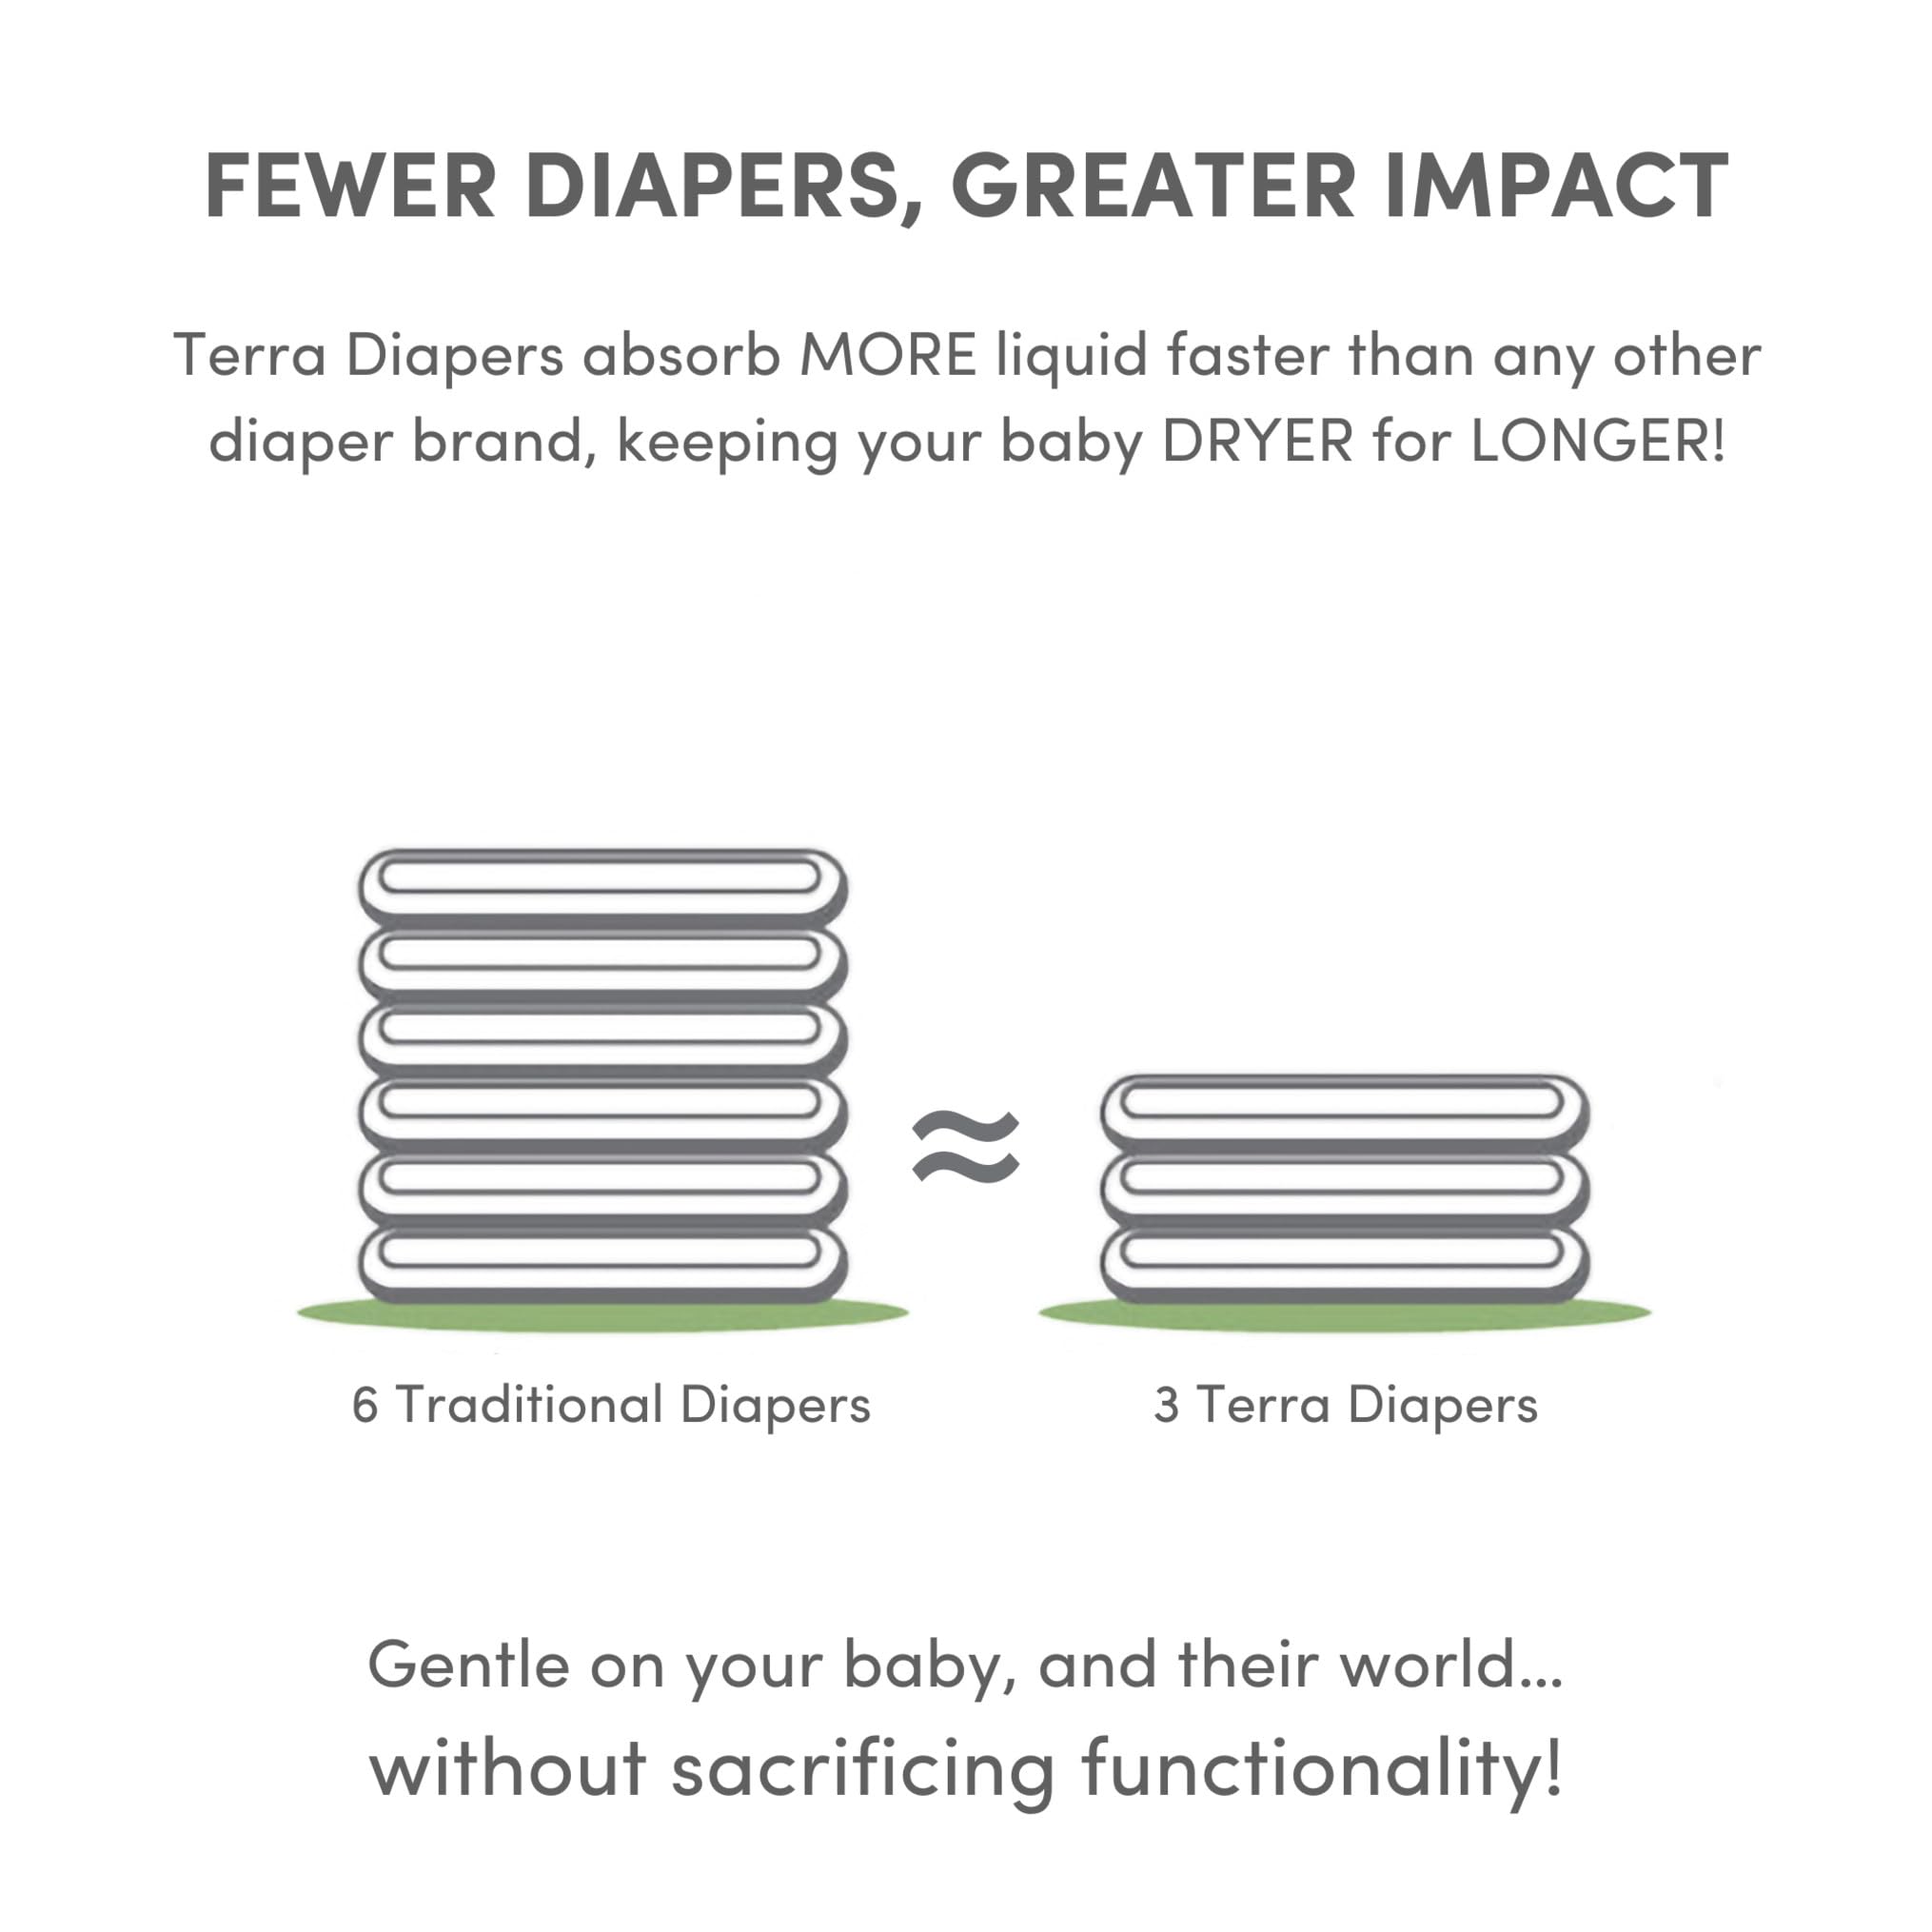 Terra Size 4 Diapers: 85% Plant-Based Diapers, Ultra-Soft & Chemical-Free for Sensitive Skin, Superior Absorbency for Day or Nighttime Diapers, Designed for Toddlers 22-30 Pounds, 18 Count